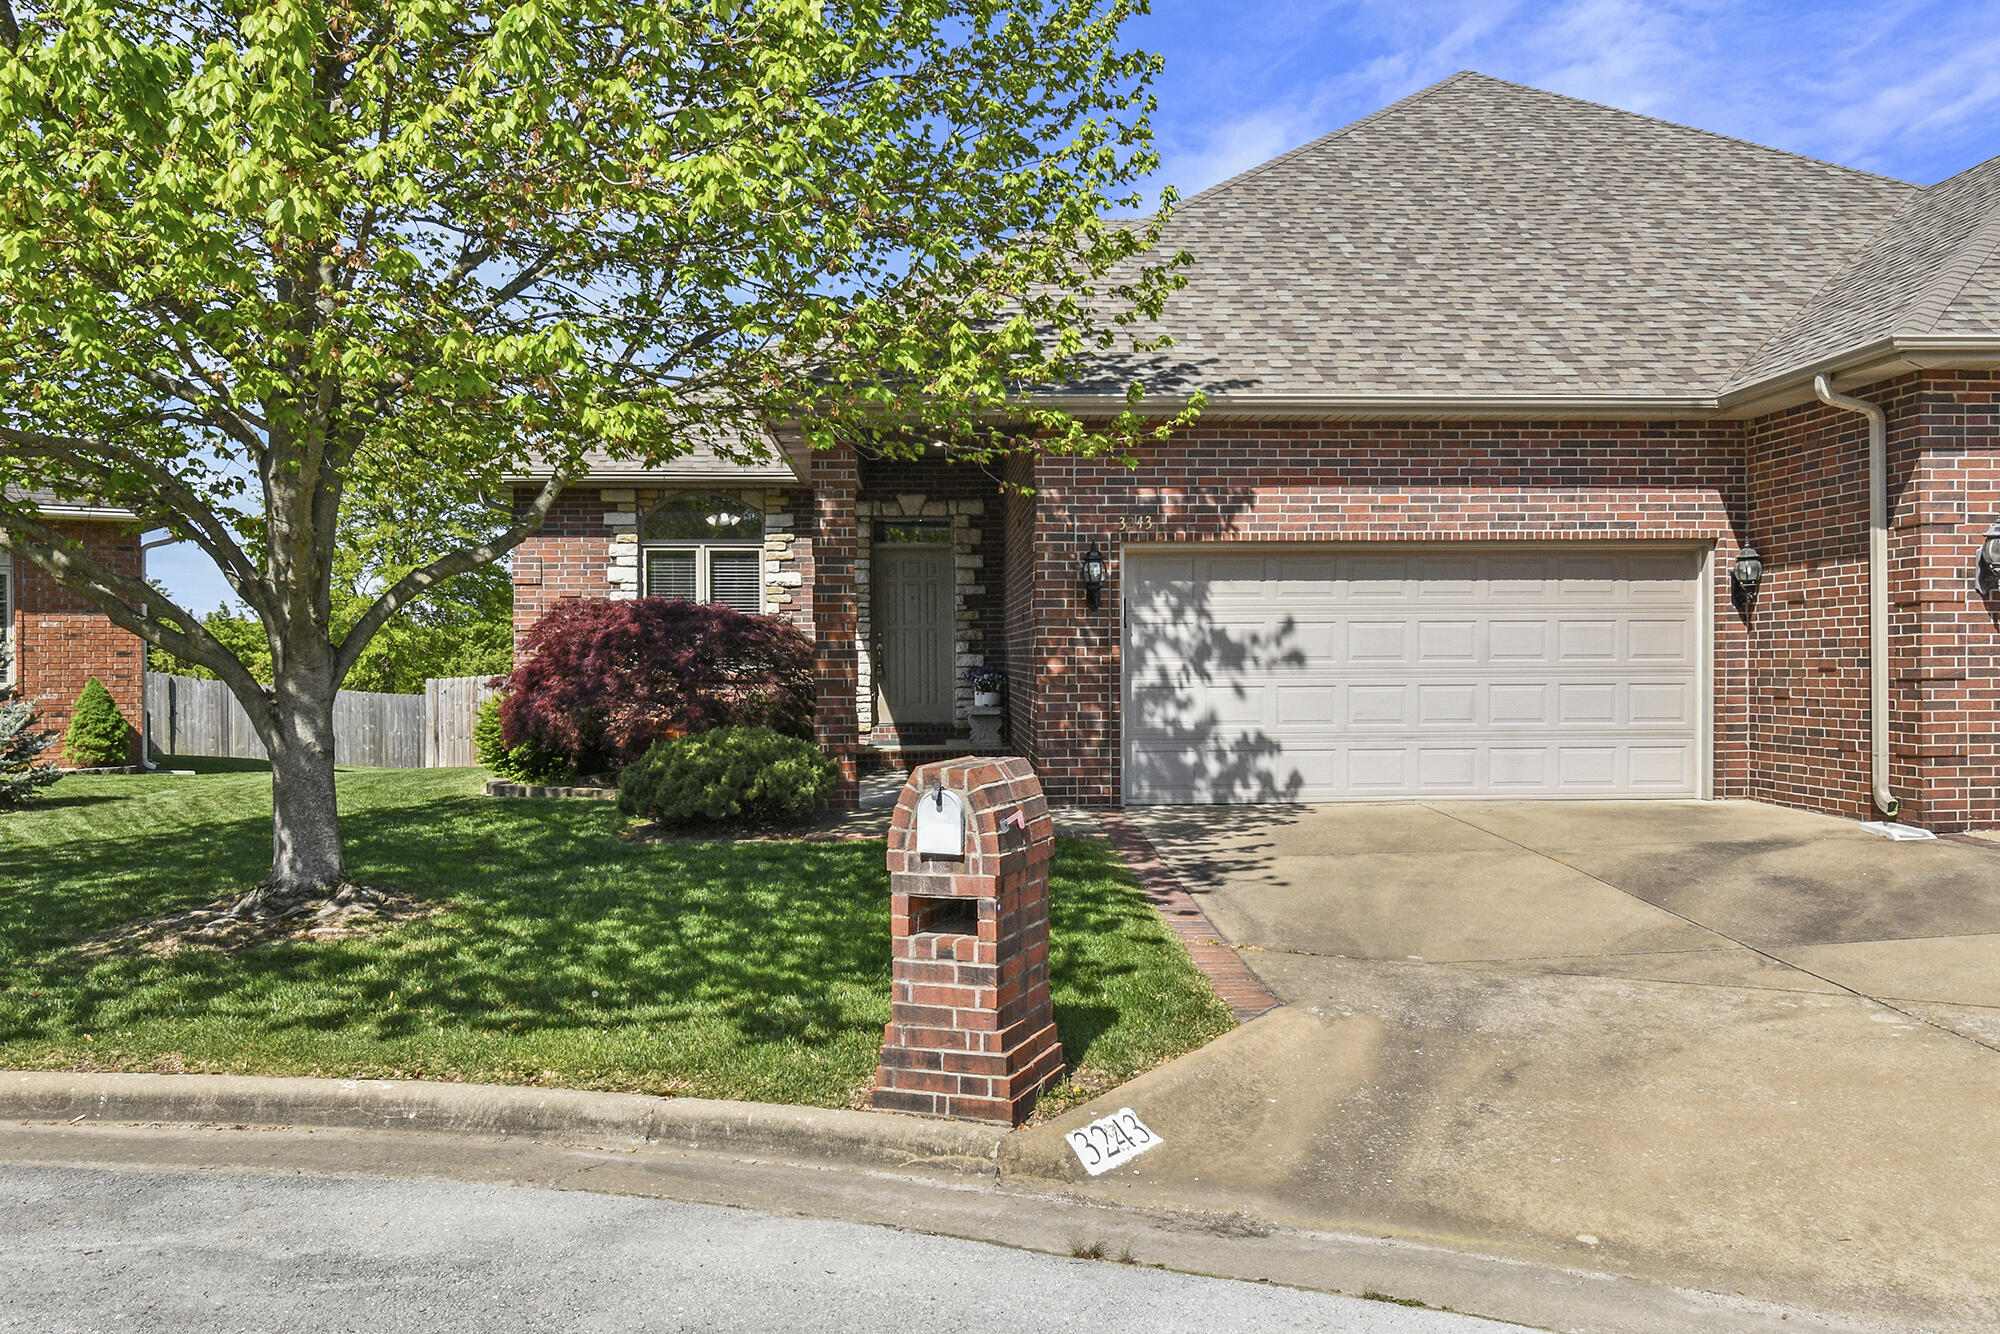 View Springfield, MO 65804 townhome